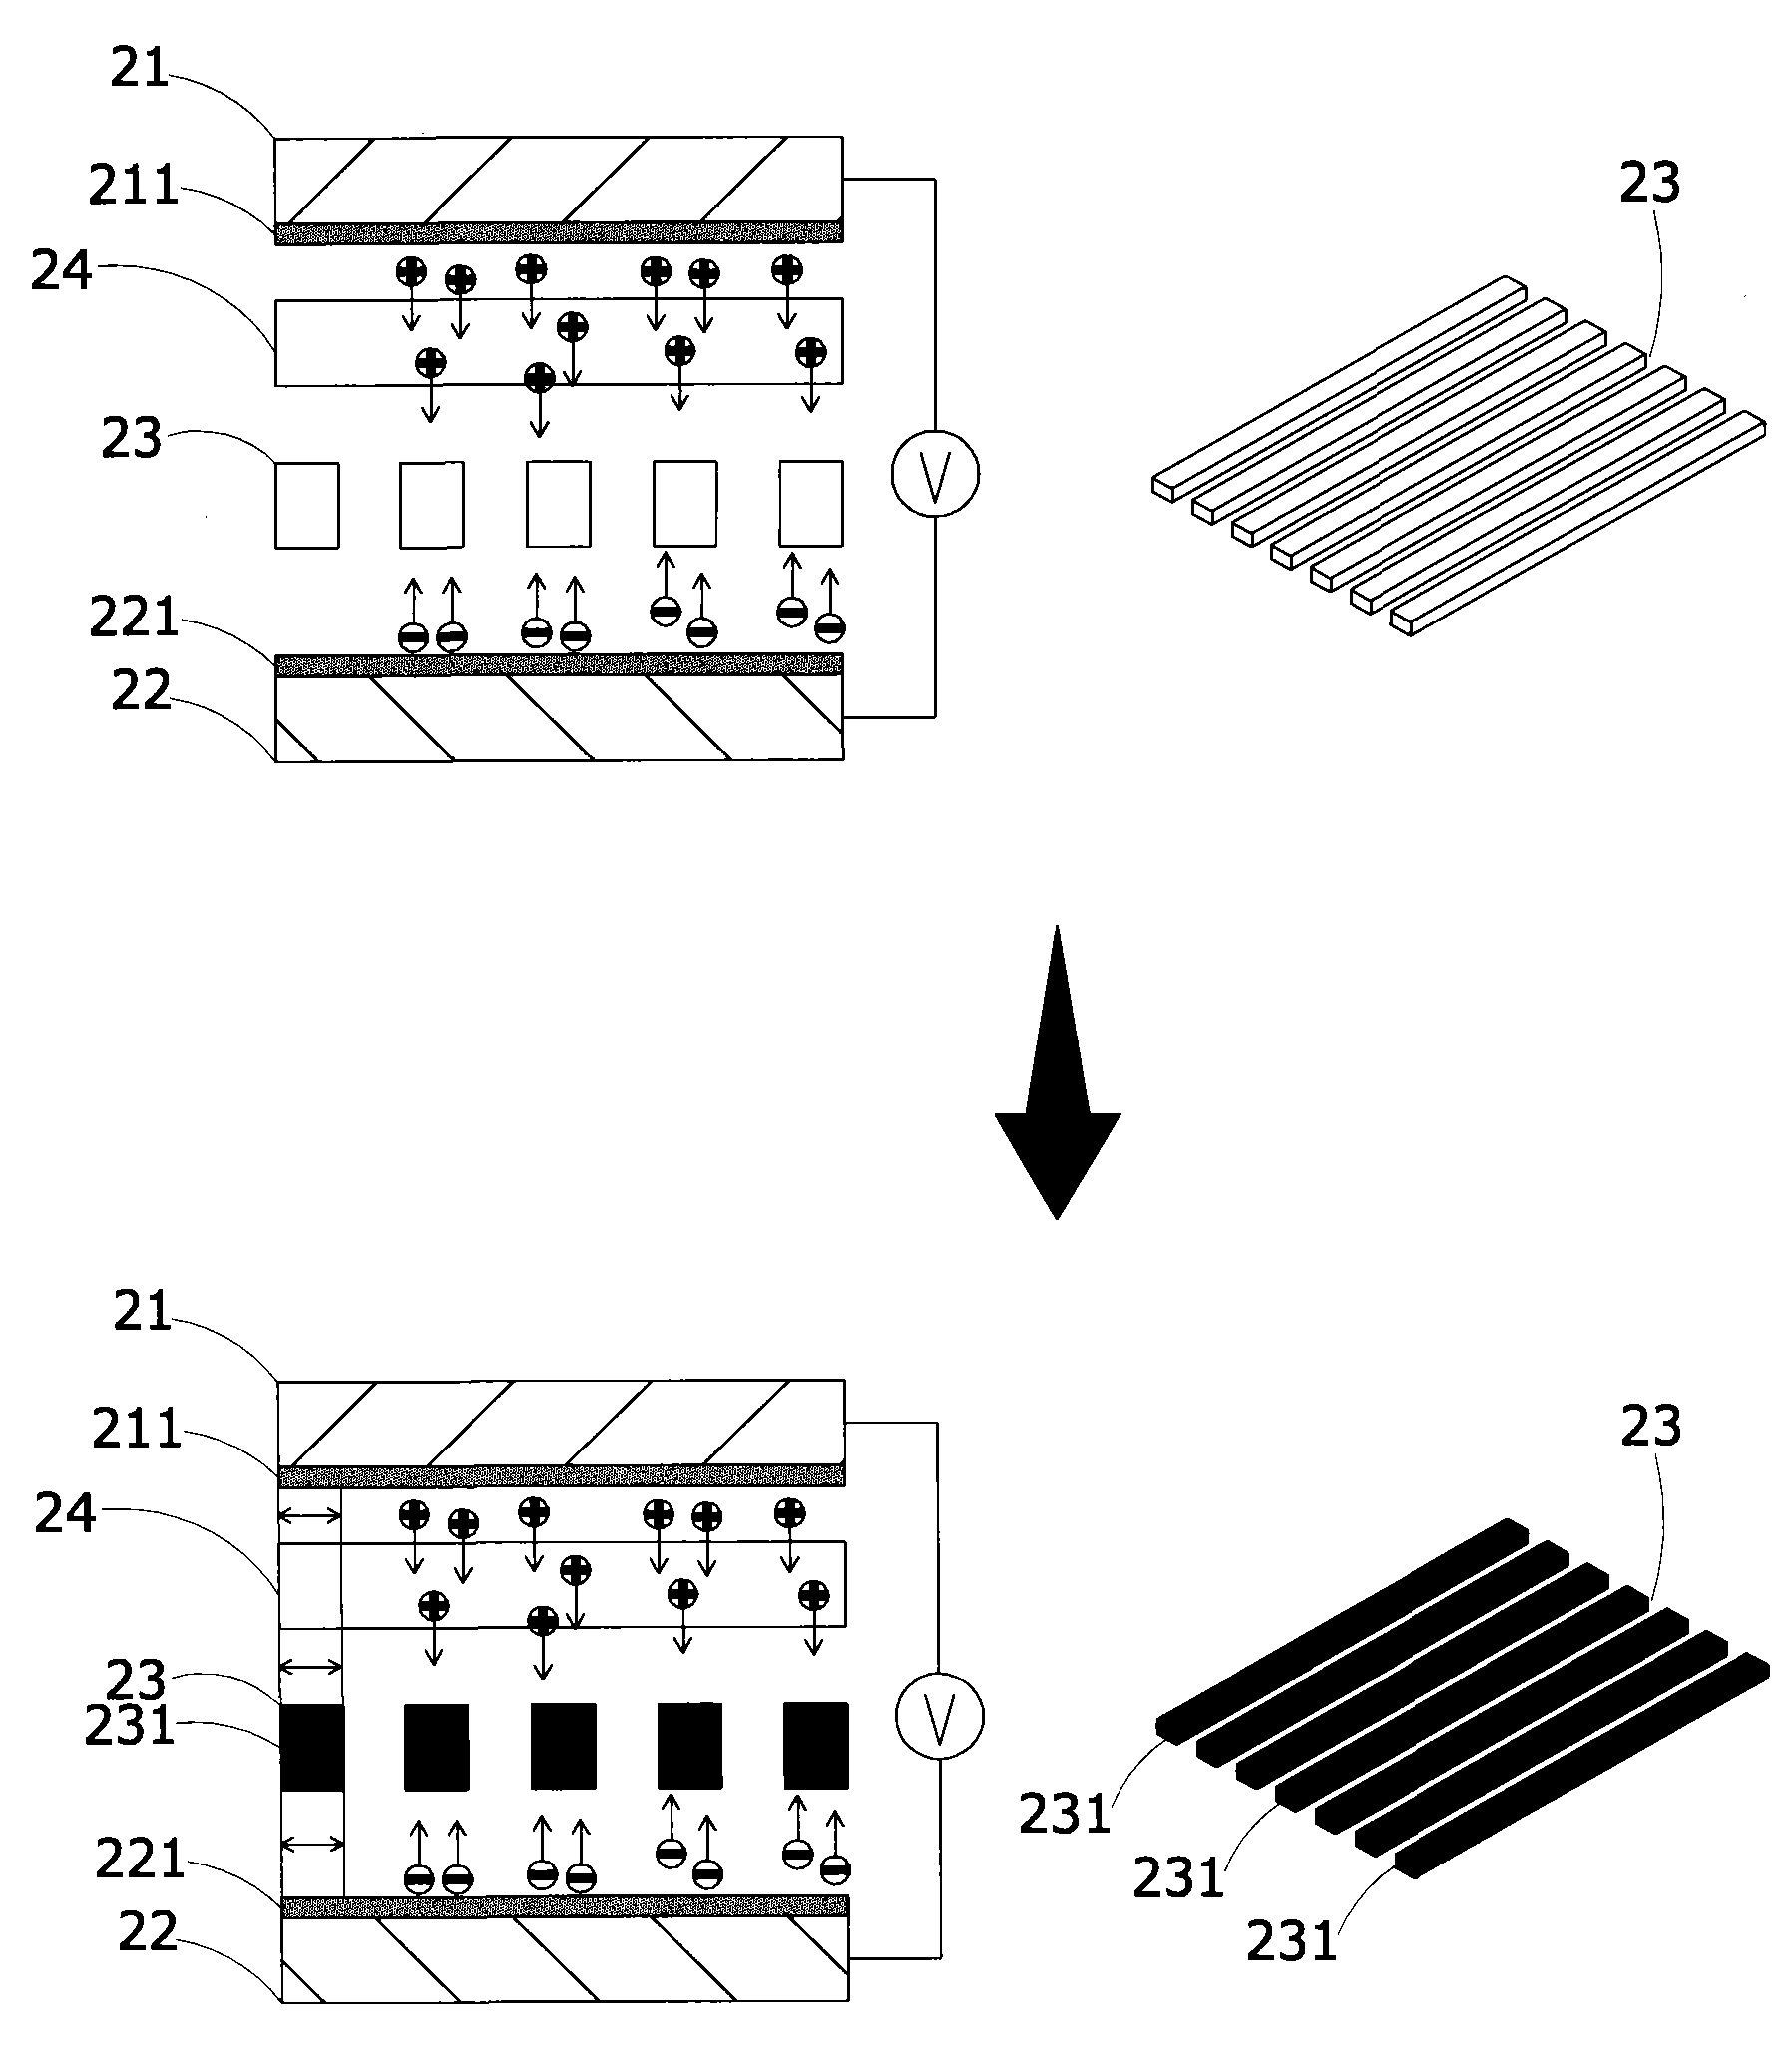 2D/3D(2 dimensional/3 dimensional) image switching display device